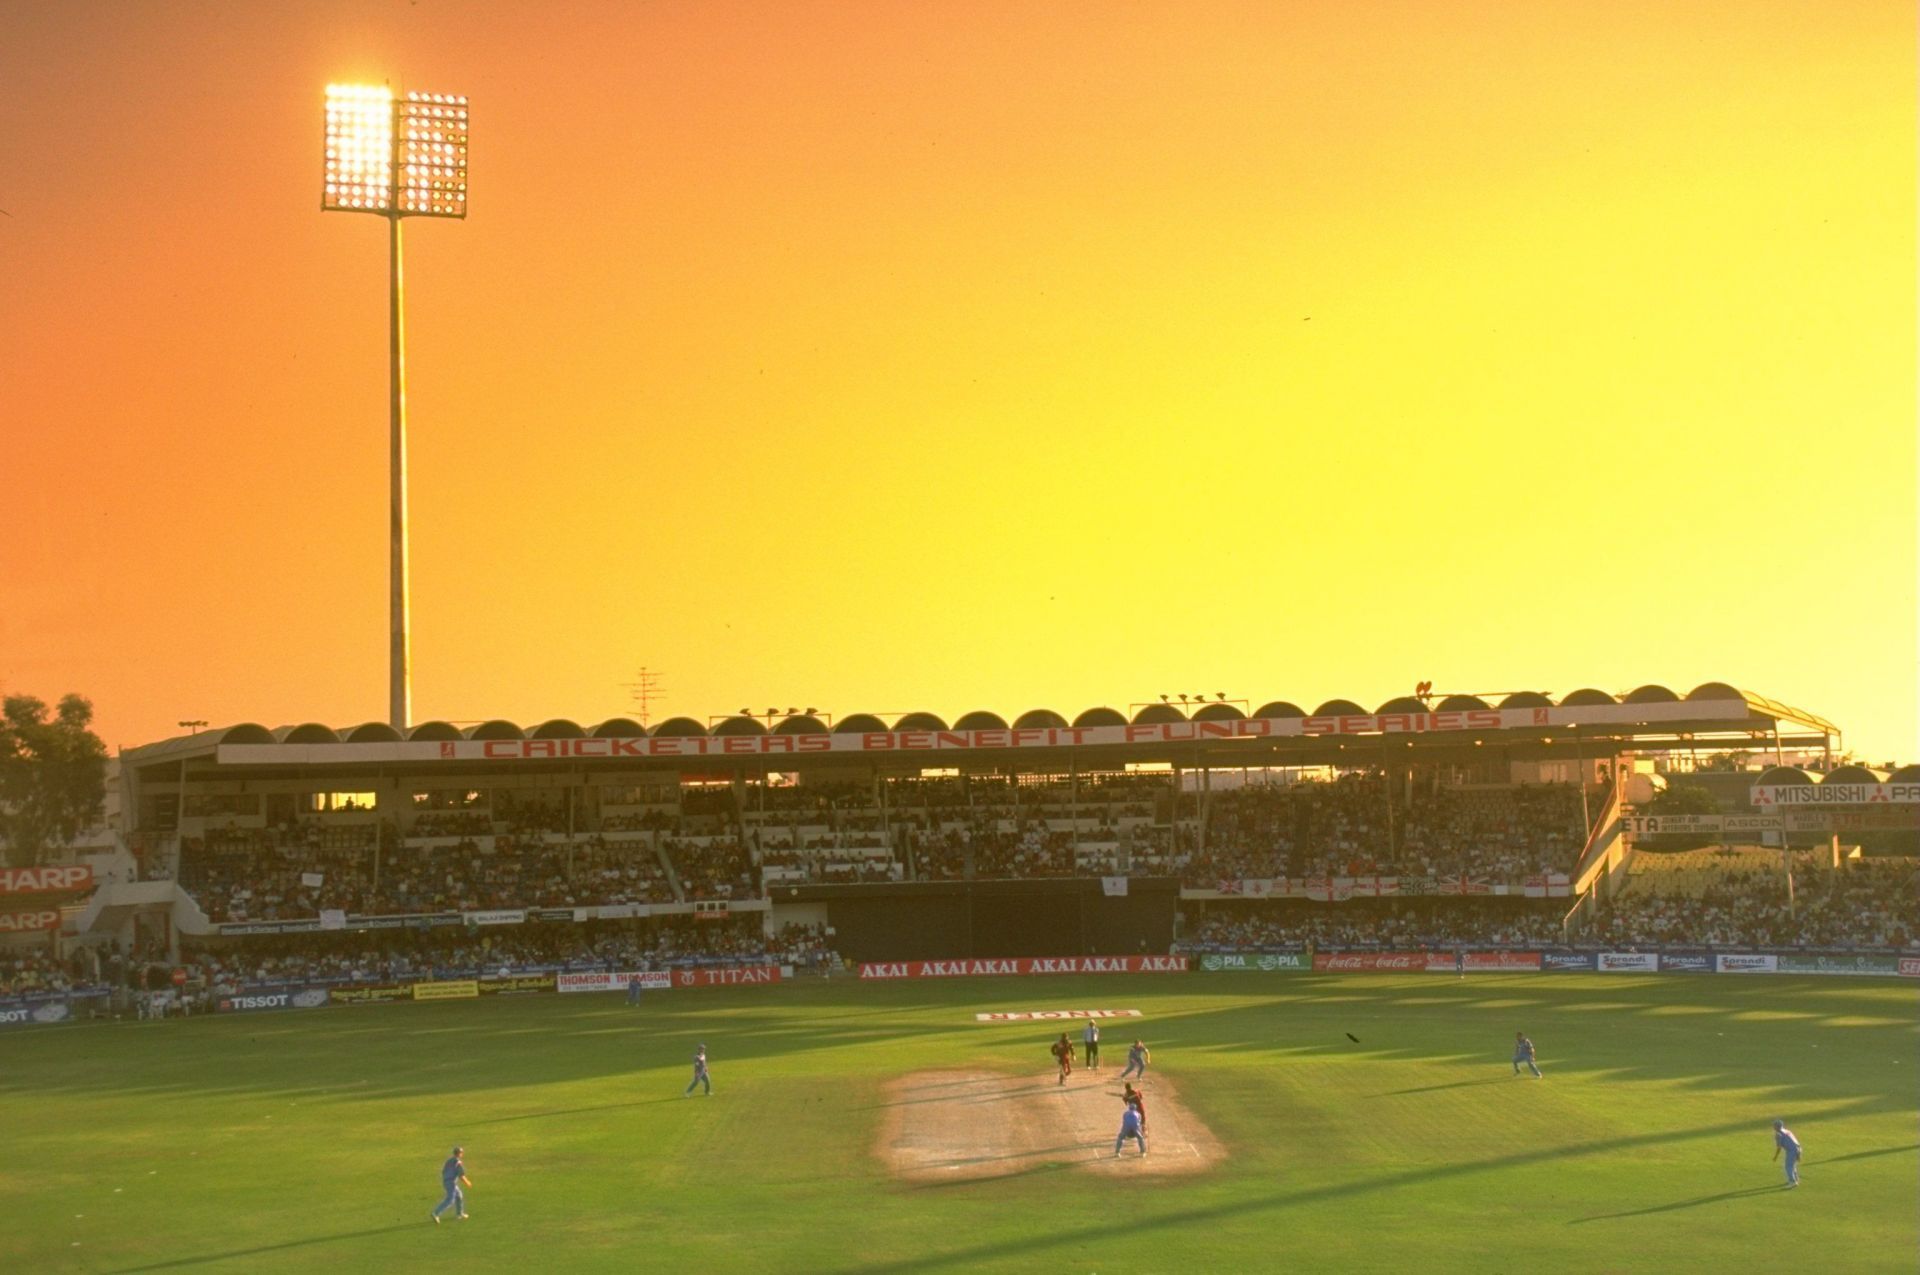 Sharjah Cricket Ground has been an iconic stadium. [Pic Credit: Getty images]